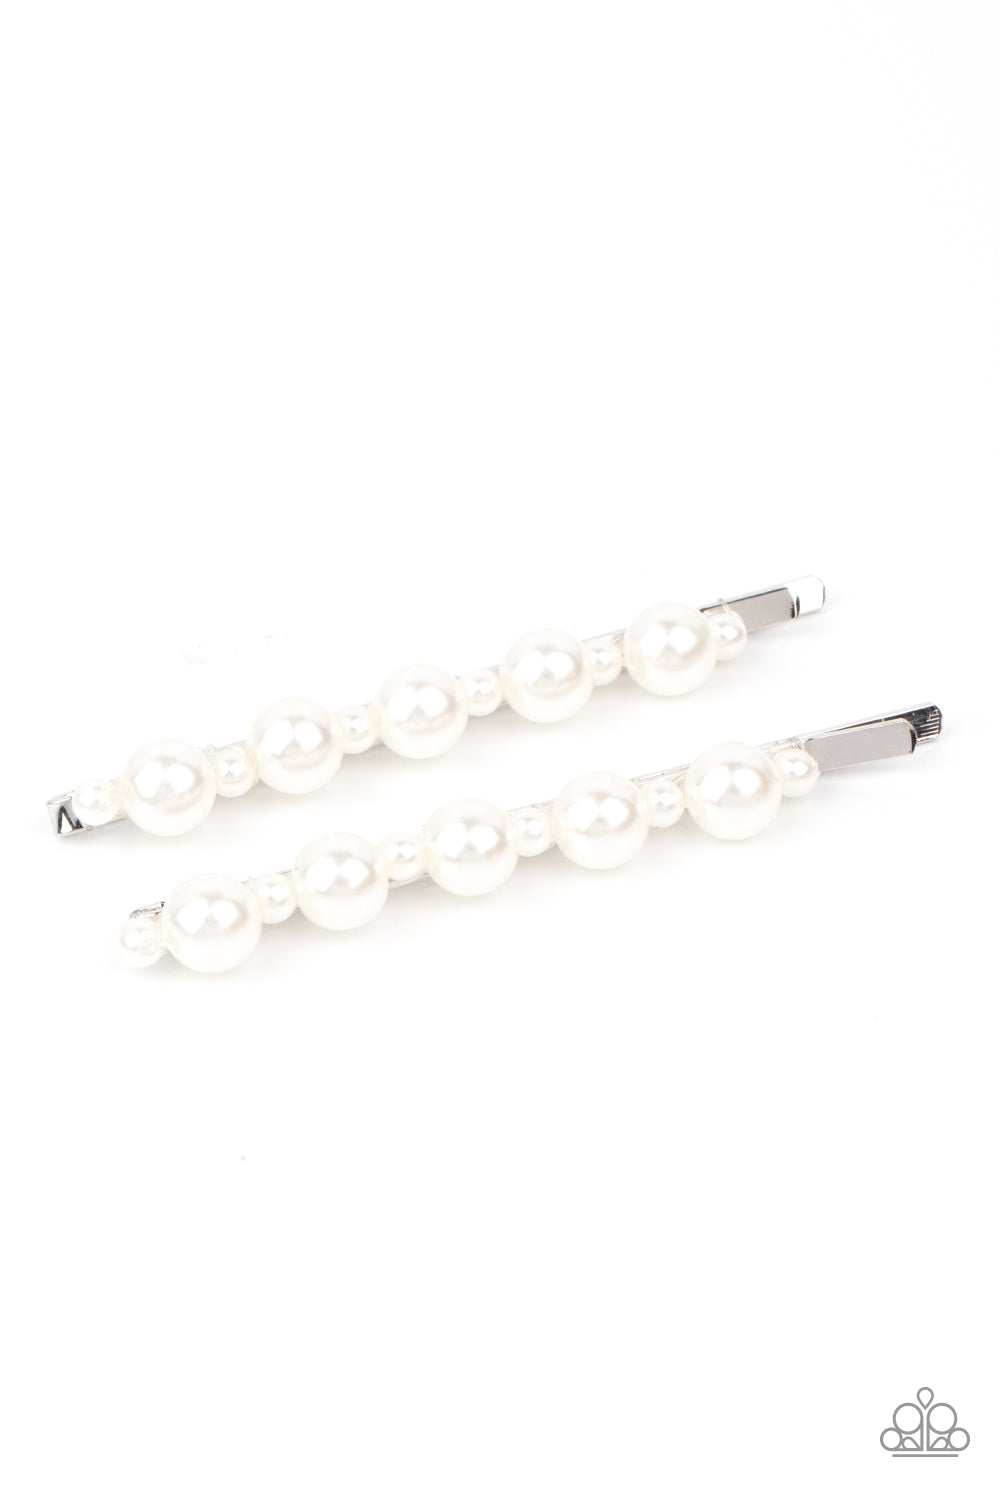 Dainty and classic pearls alternate along a pair of silver bobby pins, creating a bubbly display.  Sold as one pair of decorative bobby pins.